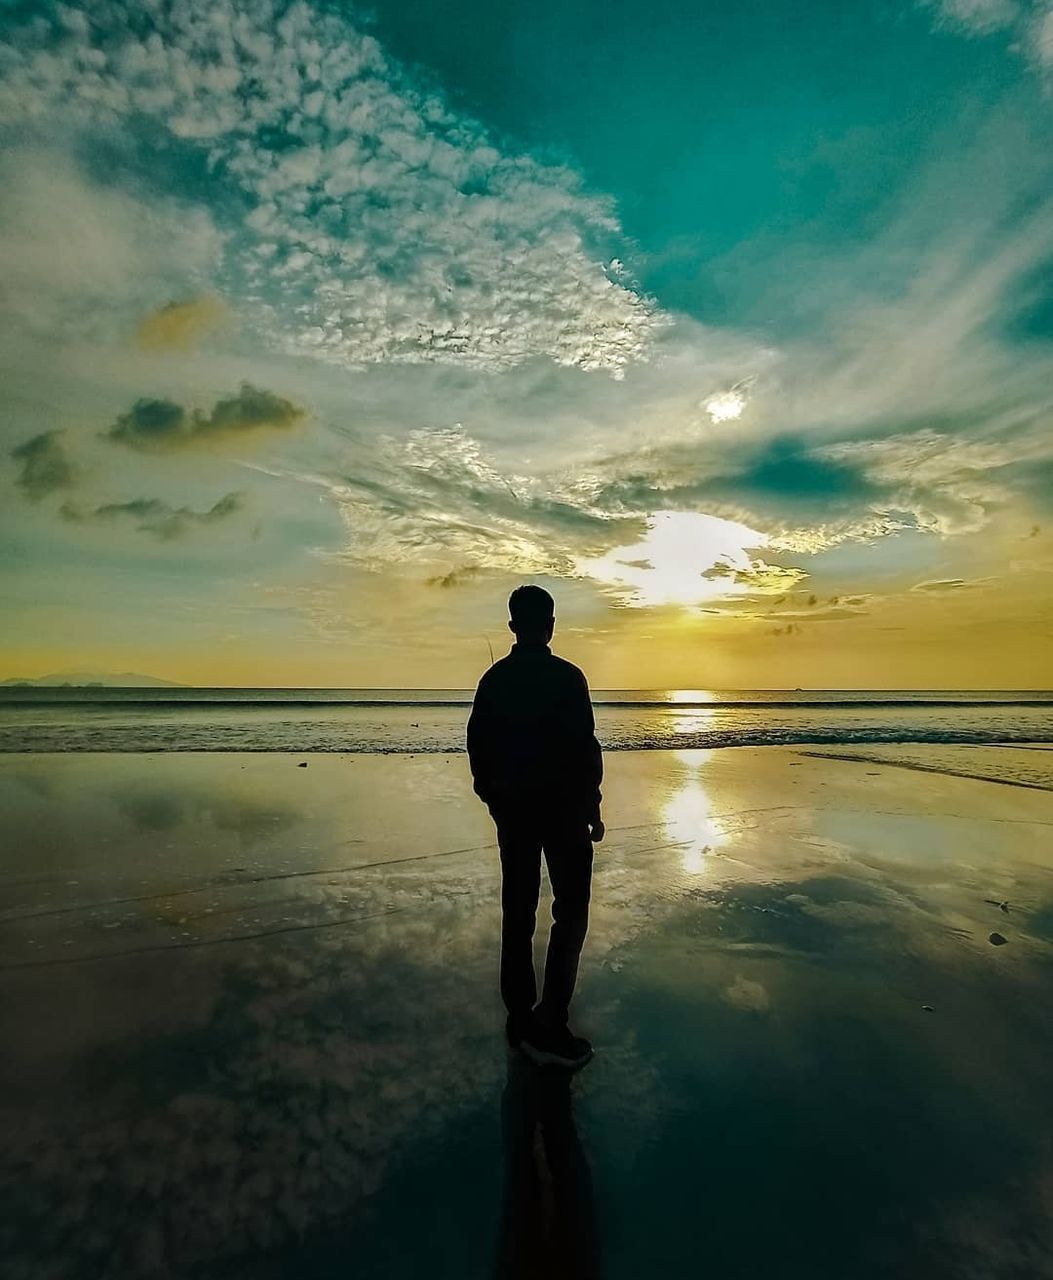 water, sky, horizon, sea, ocean, reflection, one person, cloud, beach, sunset, sunlight, silhouette, nature, beauty in nature, land, men, standing, dusk, full length, rear view, scenics - nature, evening, adult, wave, coast, tranquility, shore, person, sun, outdoors, horizon over water, tranquil scene, contemplation, vacation, solitude, leisure activity, trip, idyllic, holiday, lifestyles, back lit, environment